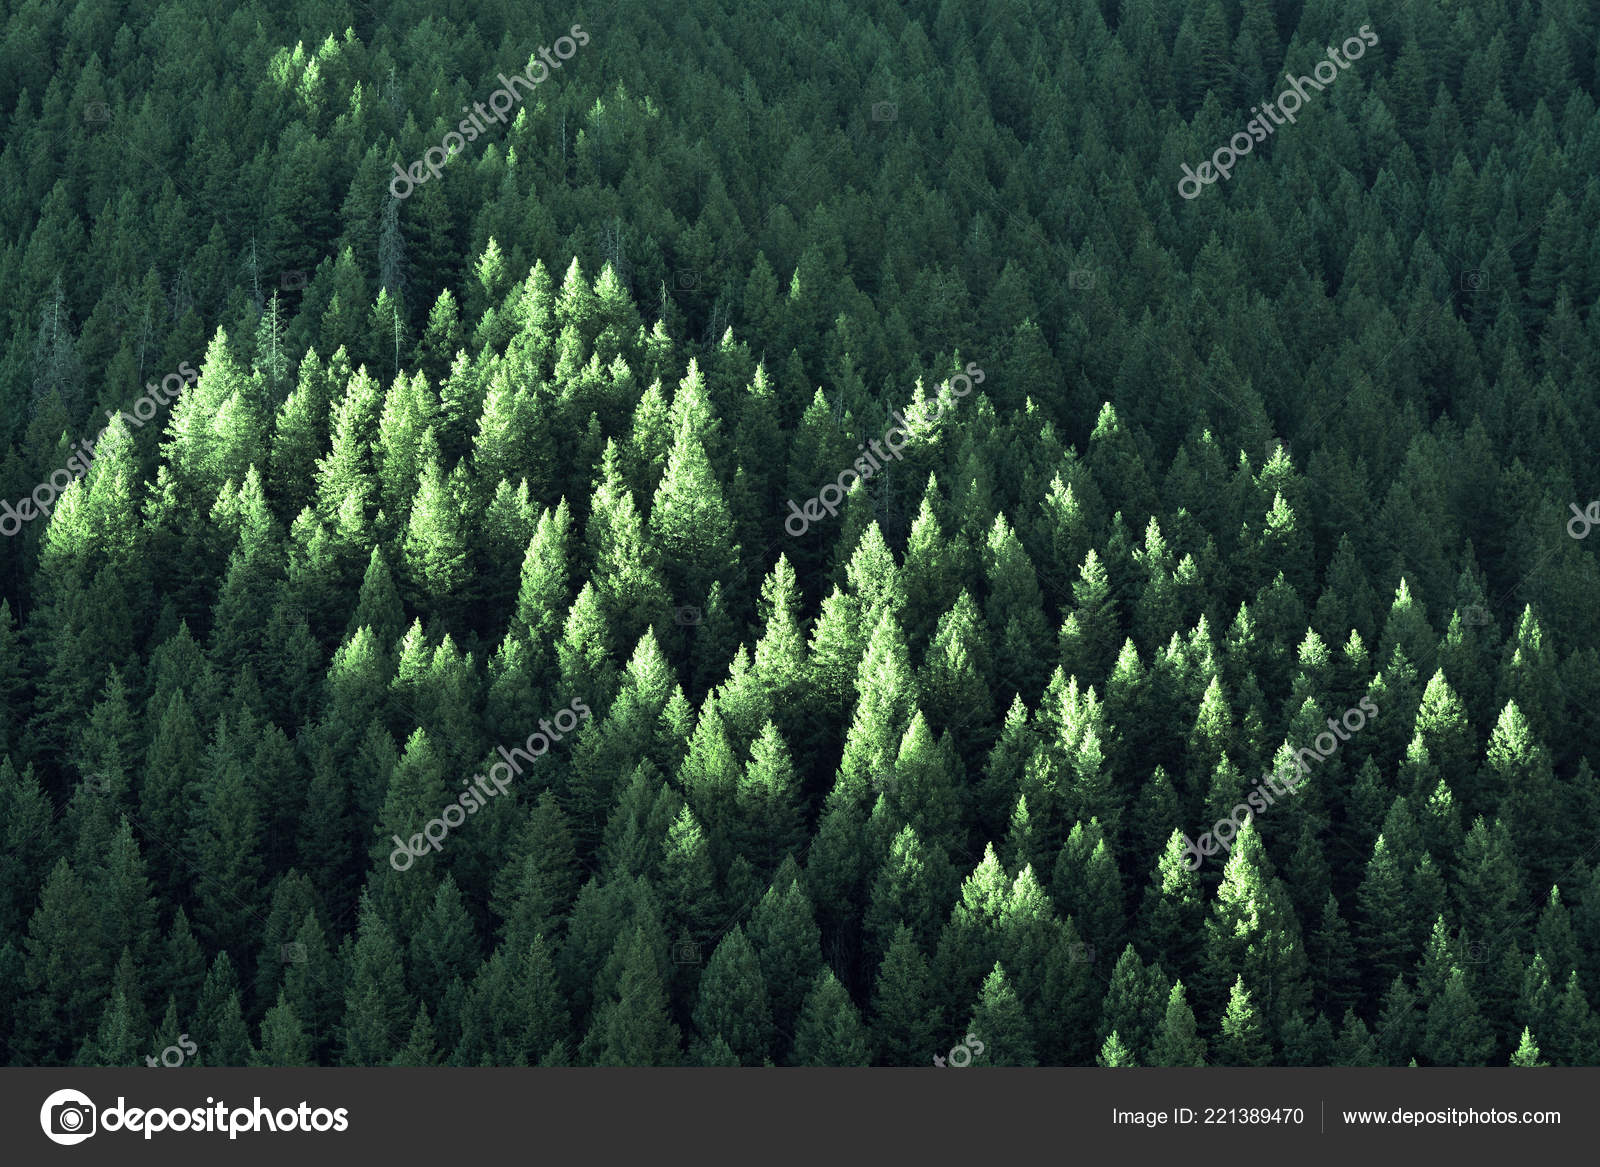 Lush Green Pine Forest in Wilderness Mountains Growth Stock Photo